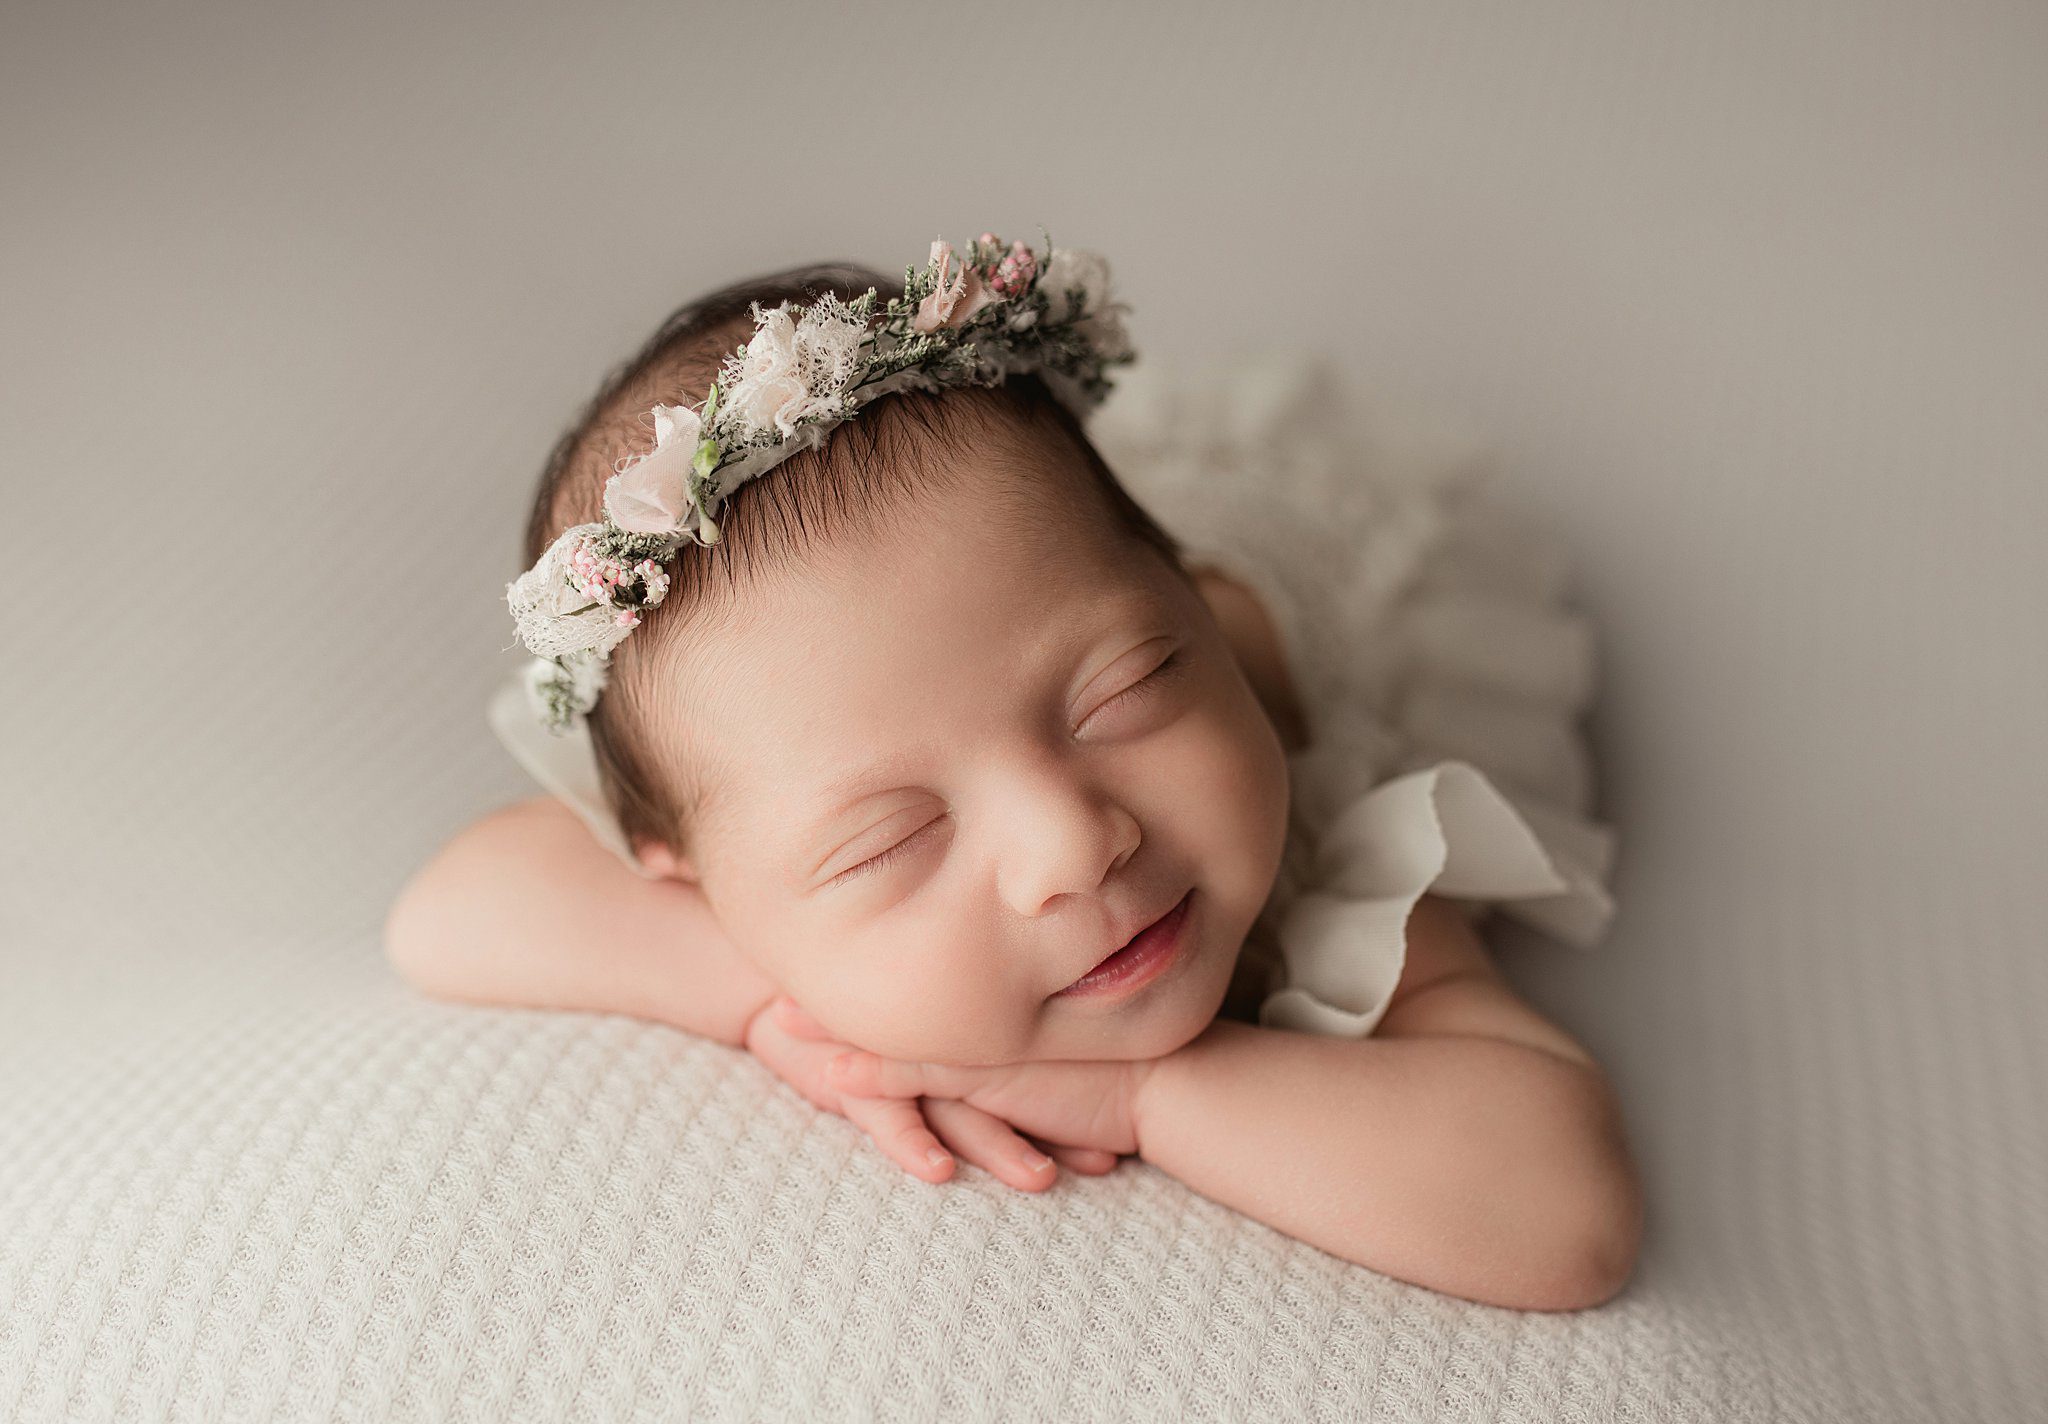 A newborn baby smiles in her sleep on a white bed in a white dress and headband